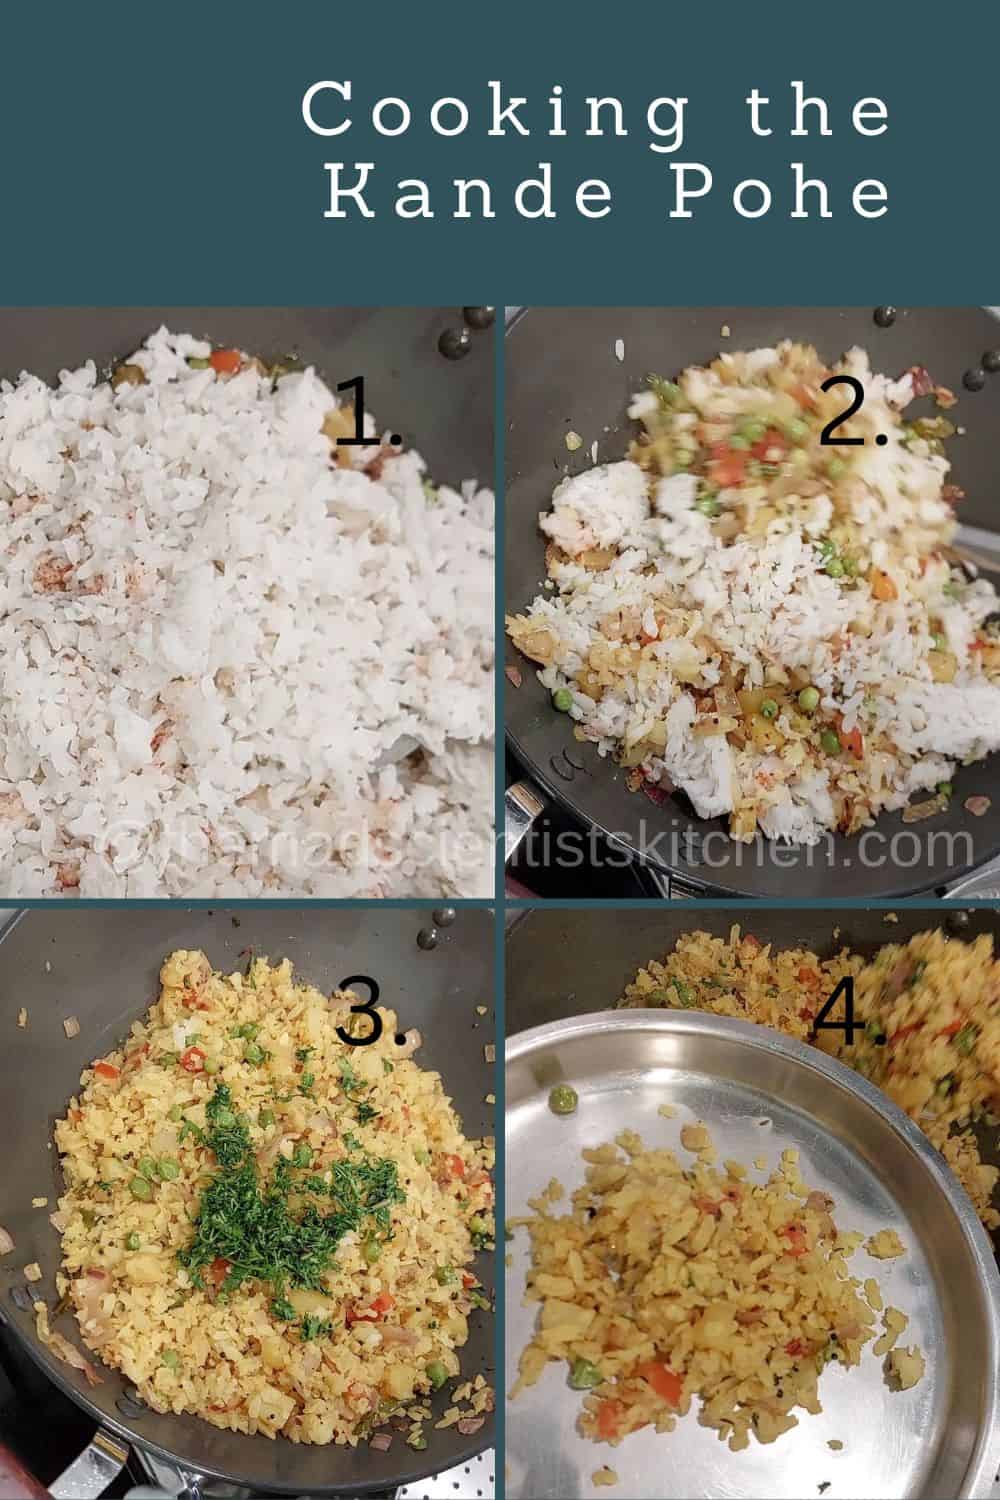 The final steps in making Kande Pohe. Cooking the beaten rice and serving.